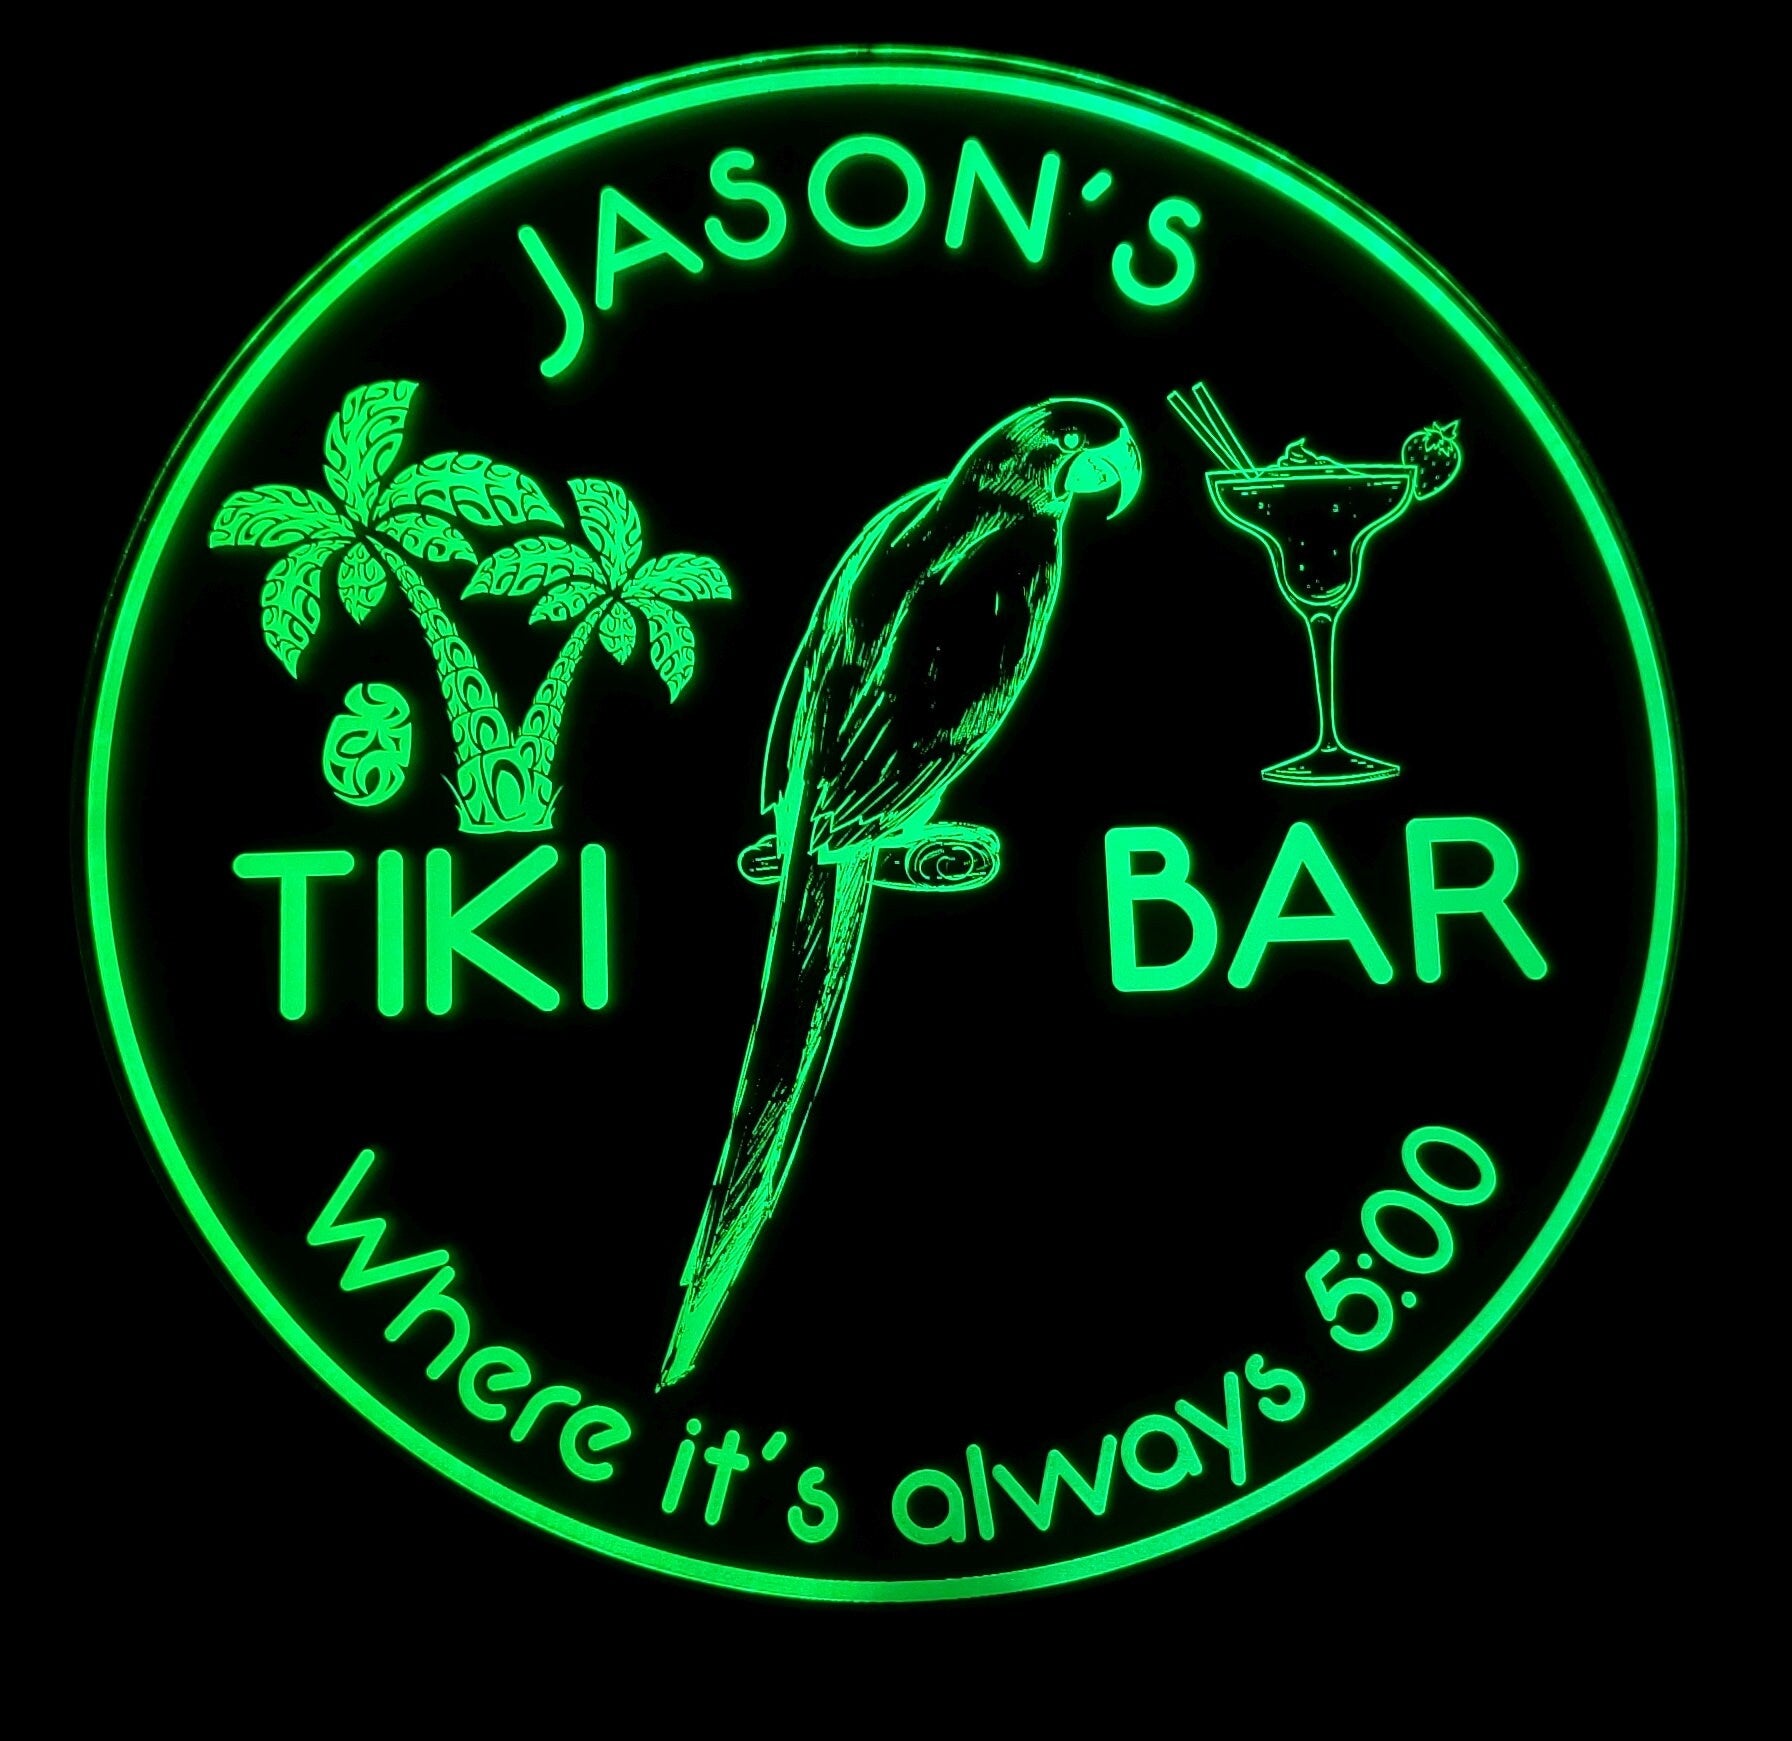 Custom Tiki Bar Sign LED Wall Sign Neon Like - Color Changing Remote Control - 4 Sizes - Made in USA - Free Shipping